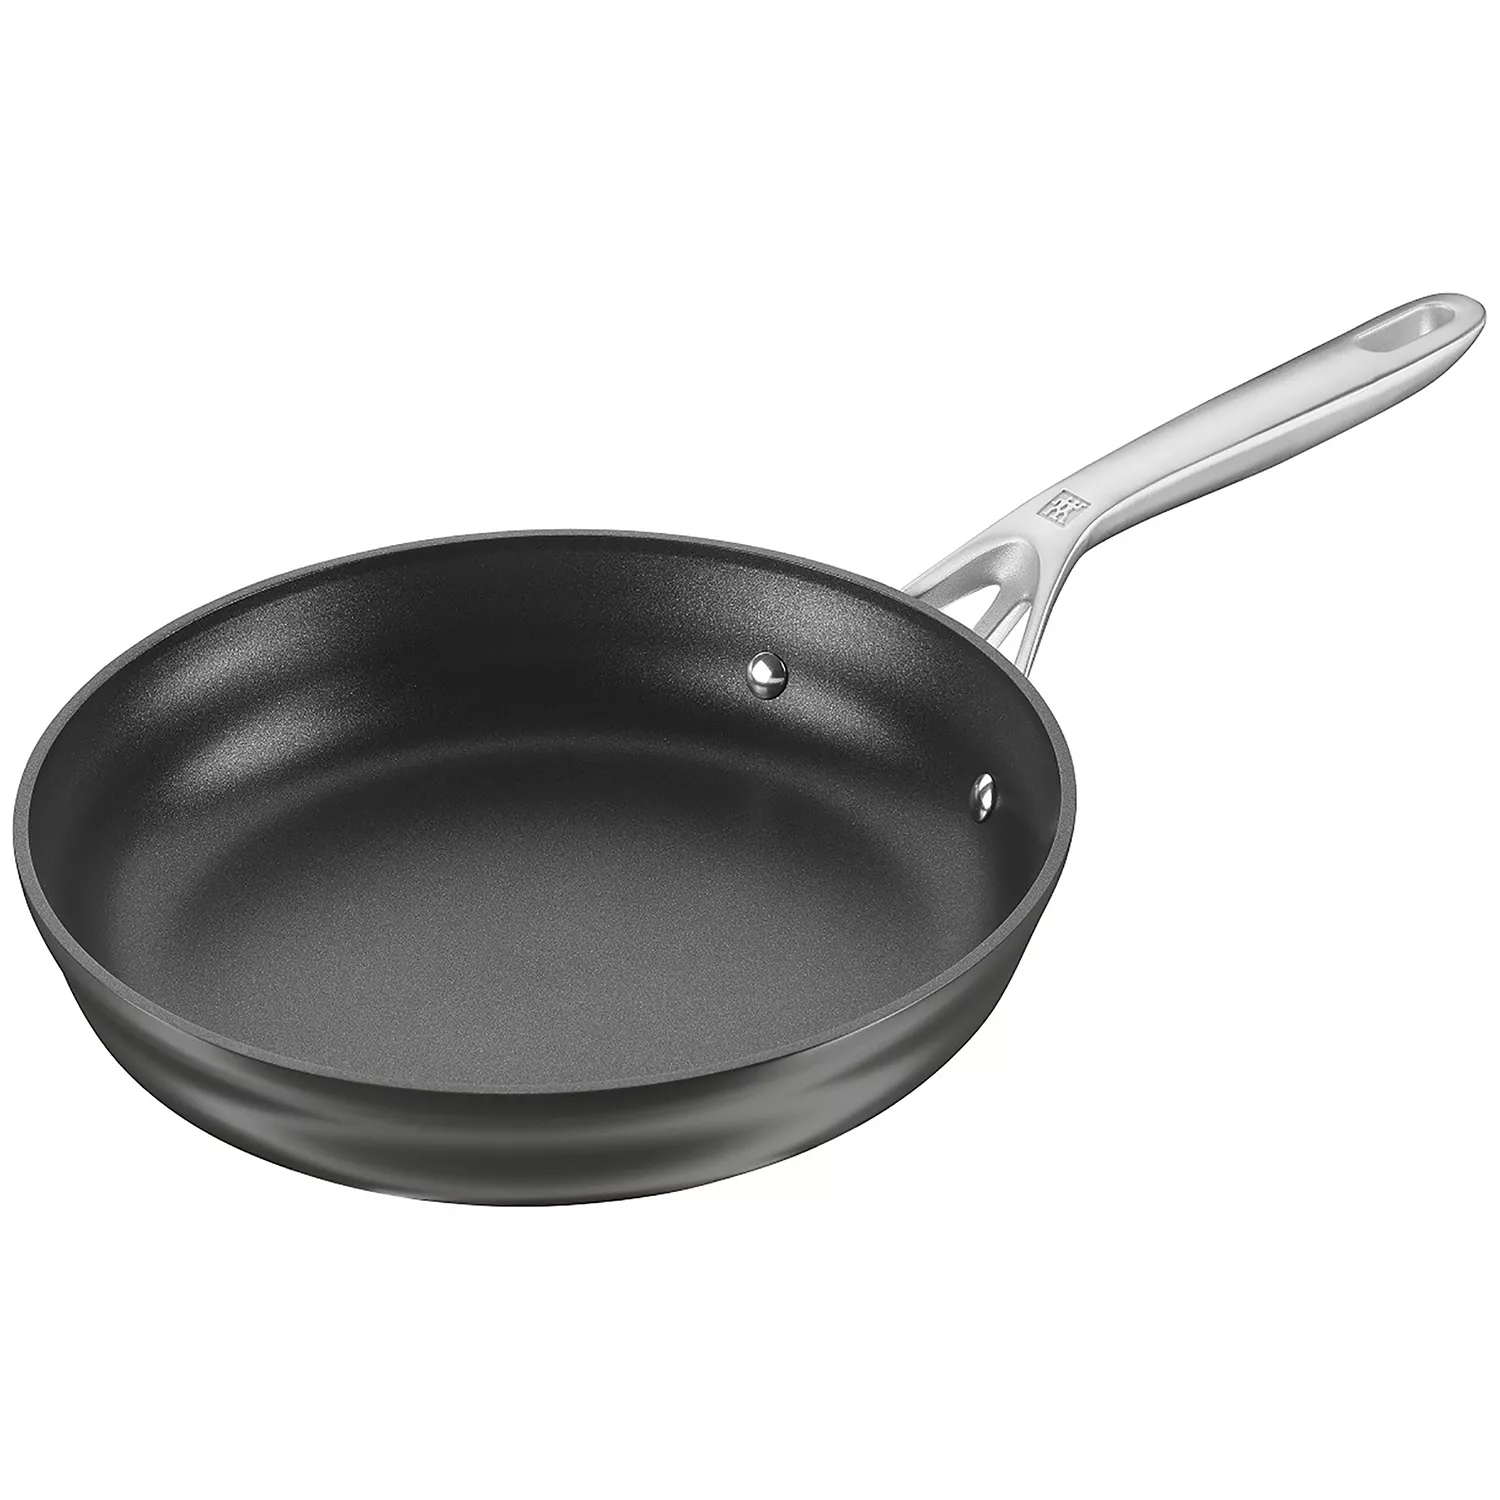 Zwilling Motion Hard Anodized Collection 3-Piece Nonstick Fry Pan Set